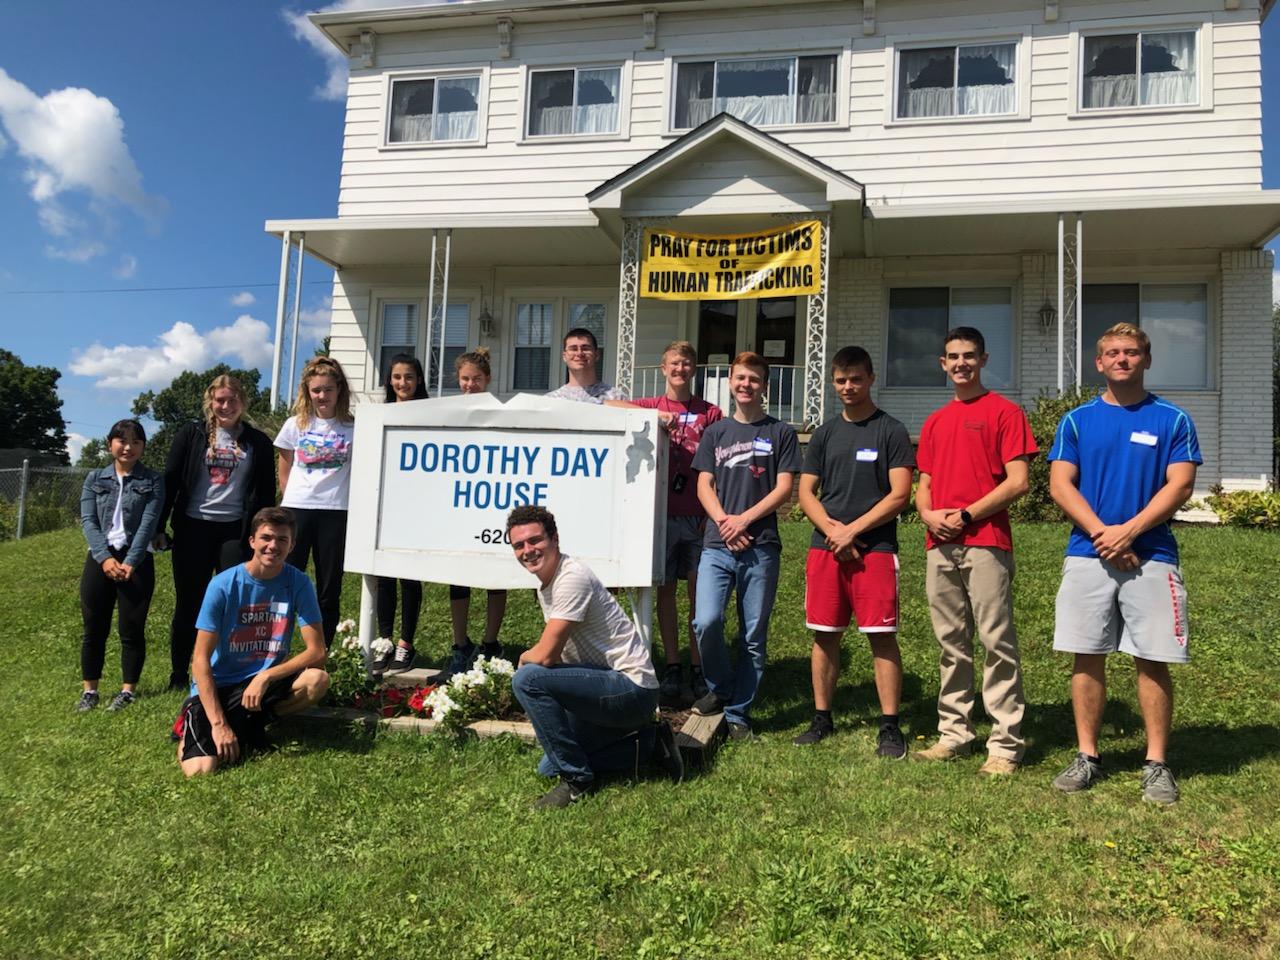 First-year students in the Honors College at Youngstown State University collectively contributed nearly 1,000 hours of service to the community as part of Global Day of Service.